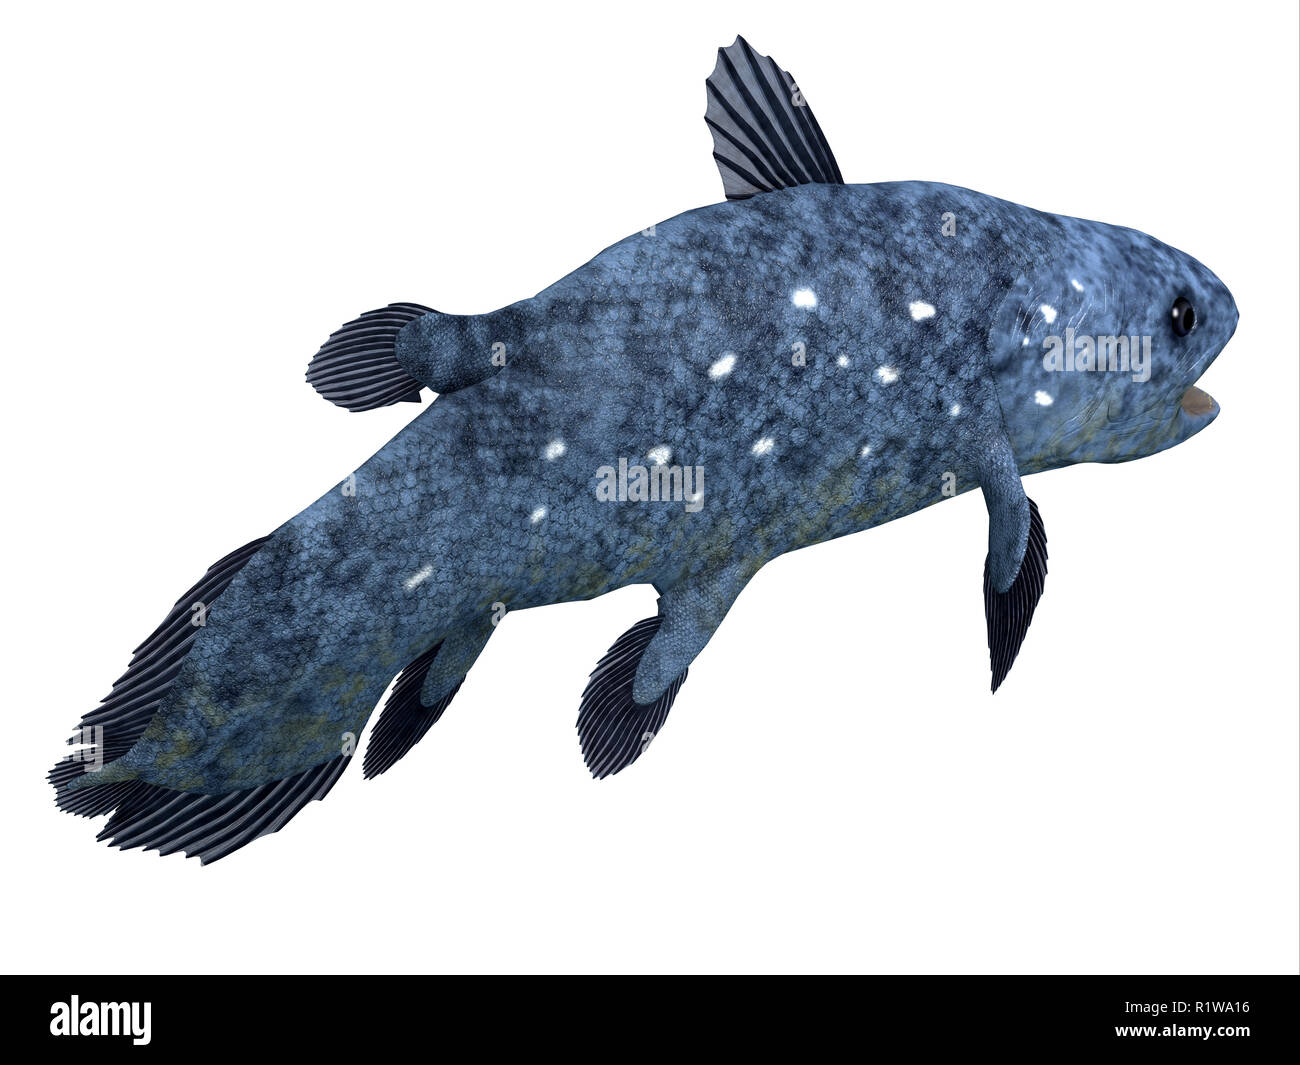 The Coelacanth fish was thought to be extinct but was found to be a living species in present times. Stock Photo